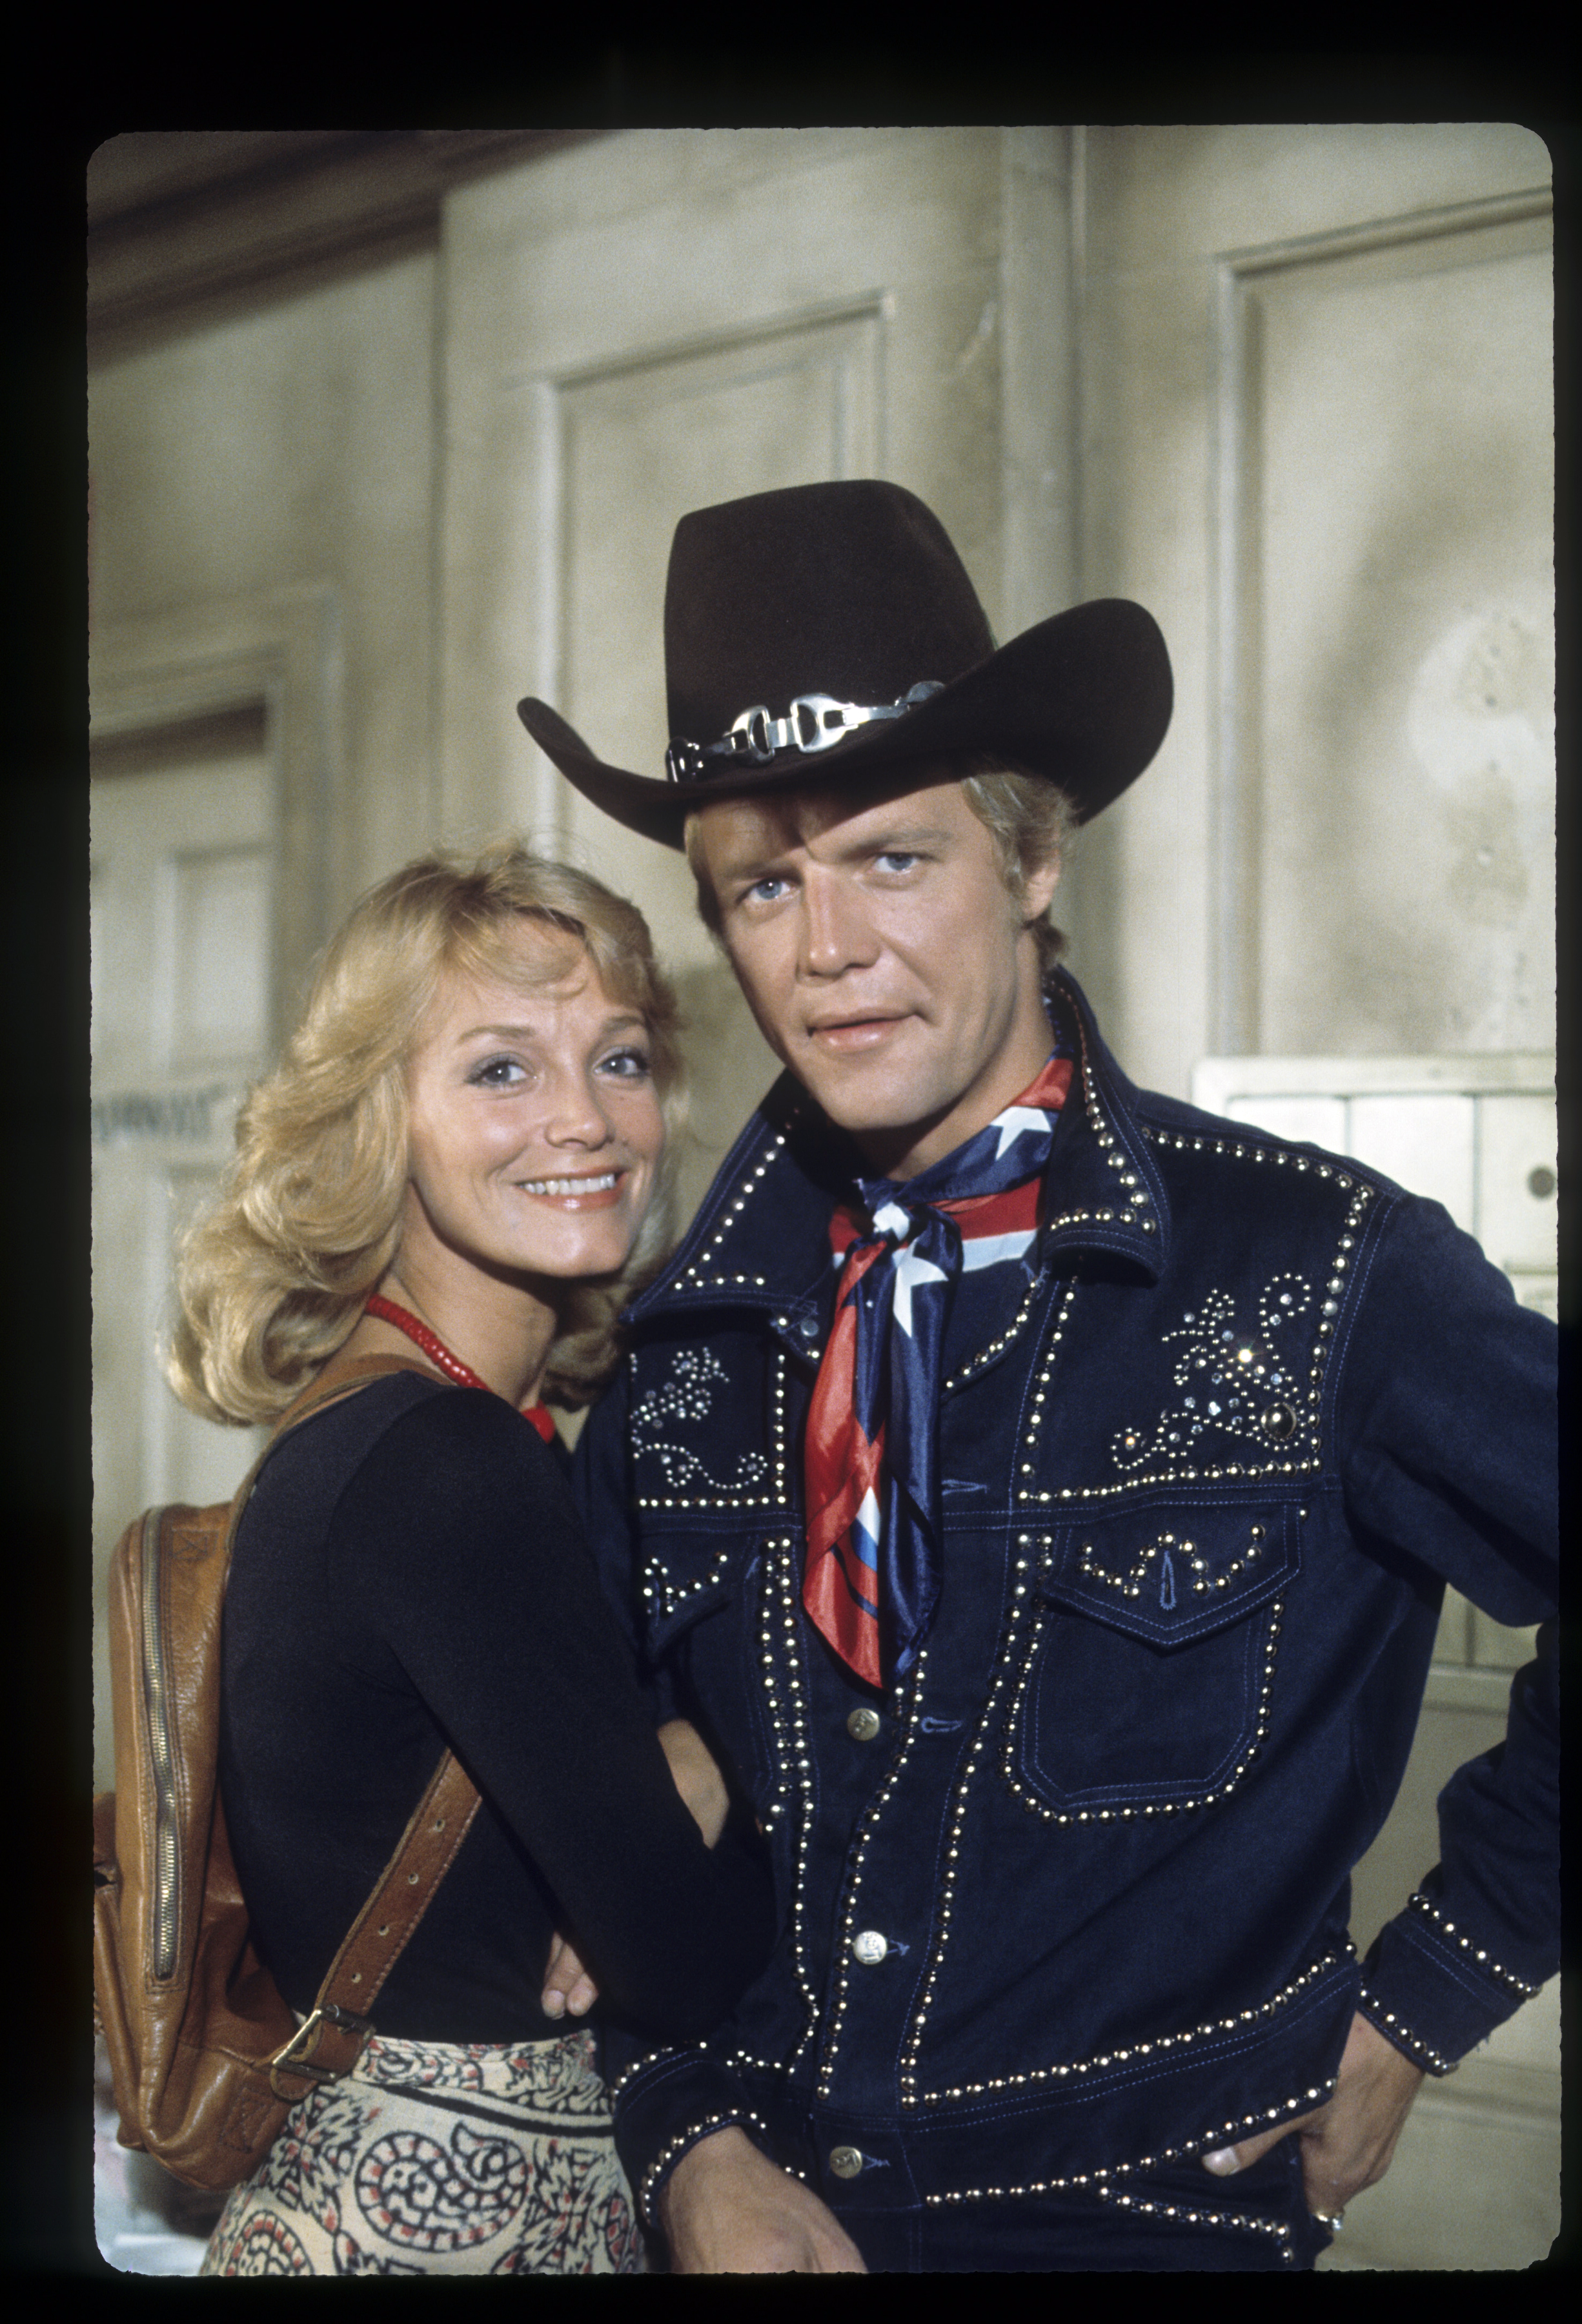 Lynne Marta and David Soul in "Starsky & Hutch" in 1975 | Source: Getty Images